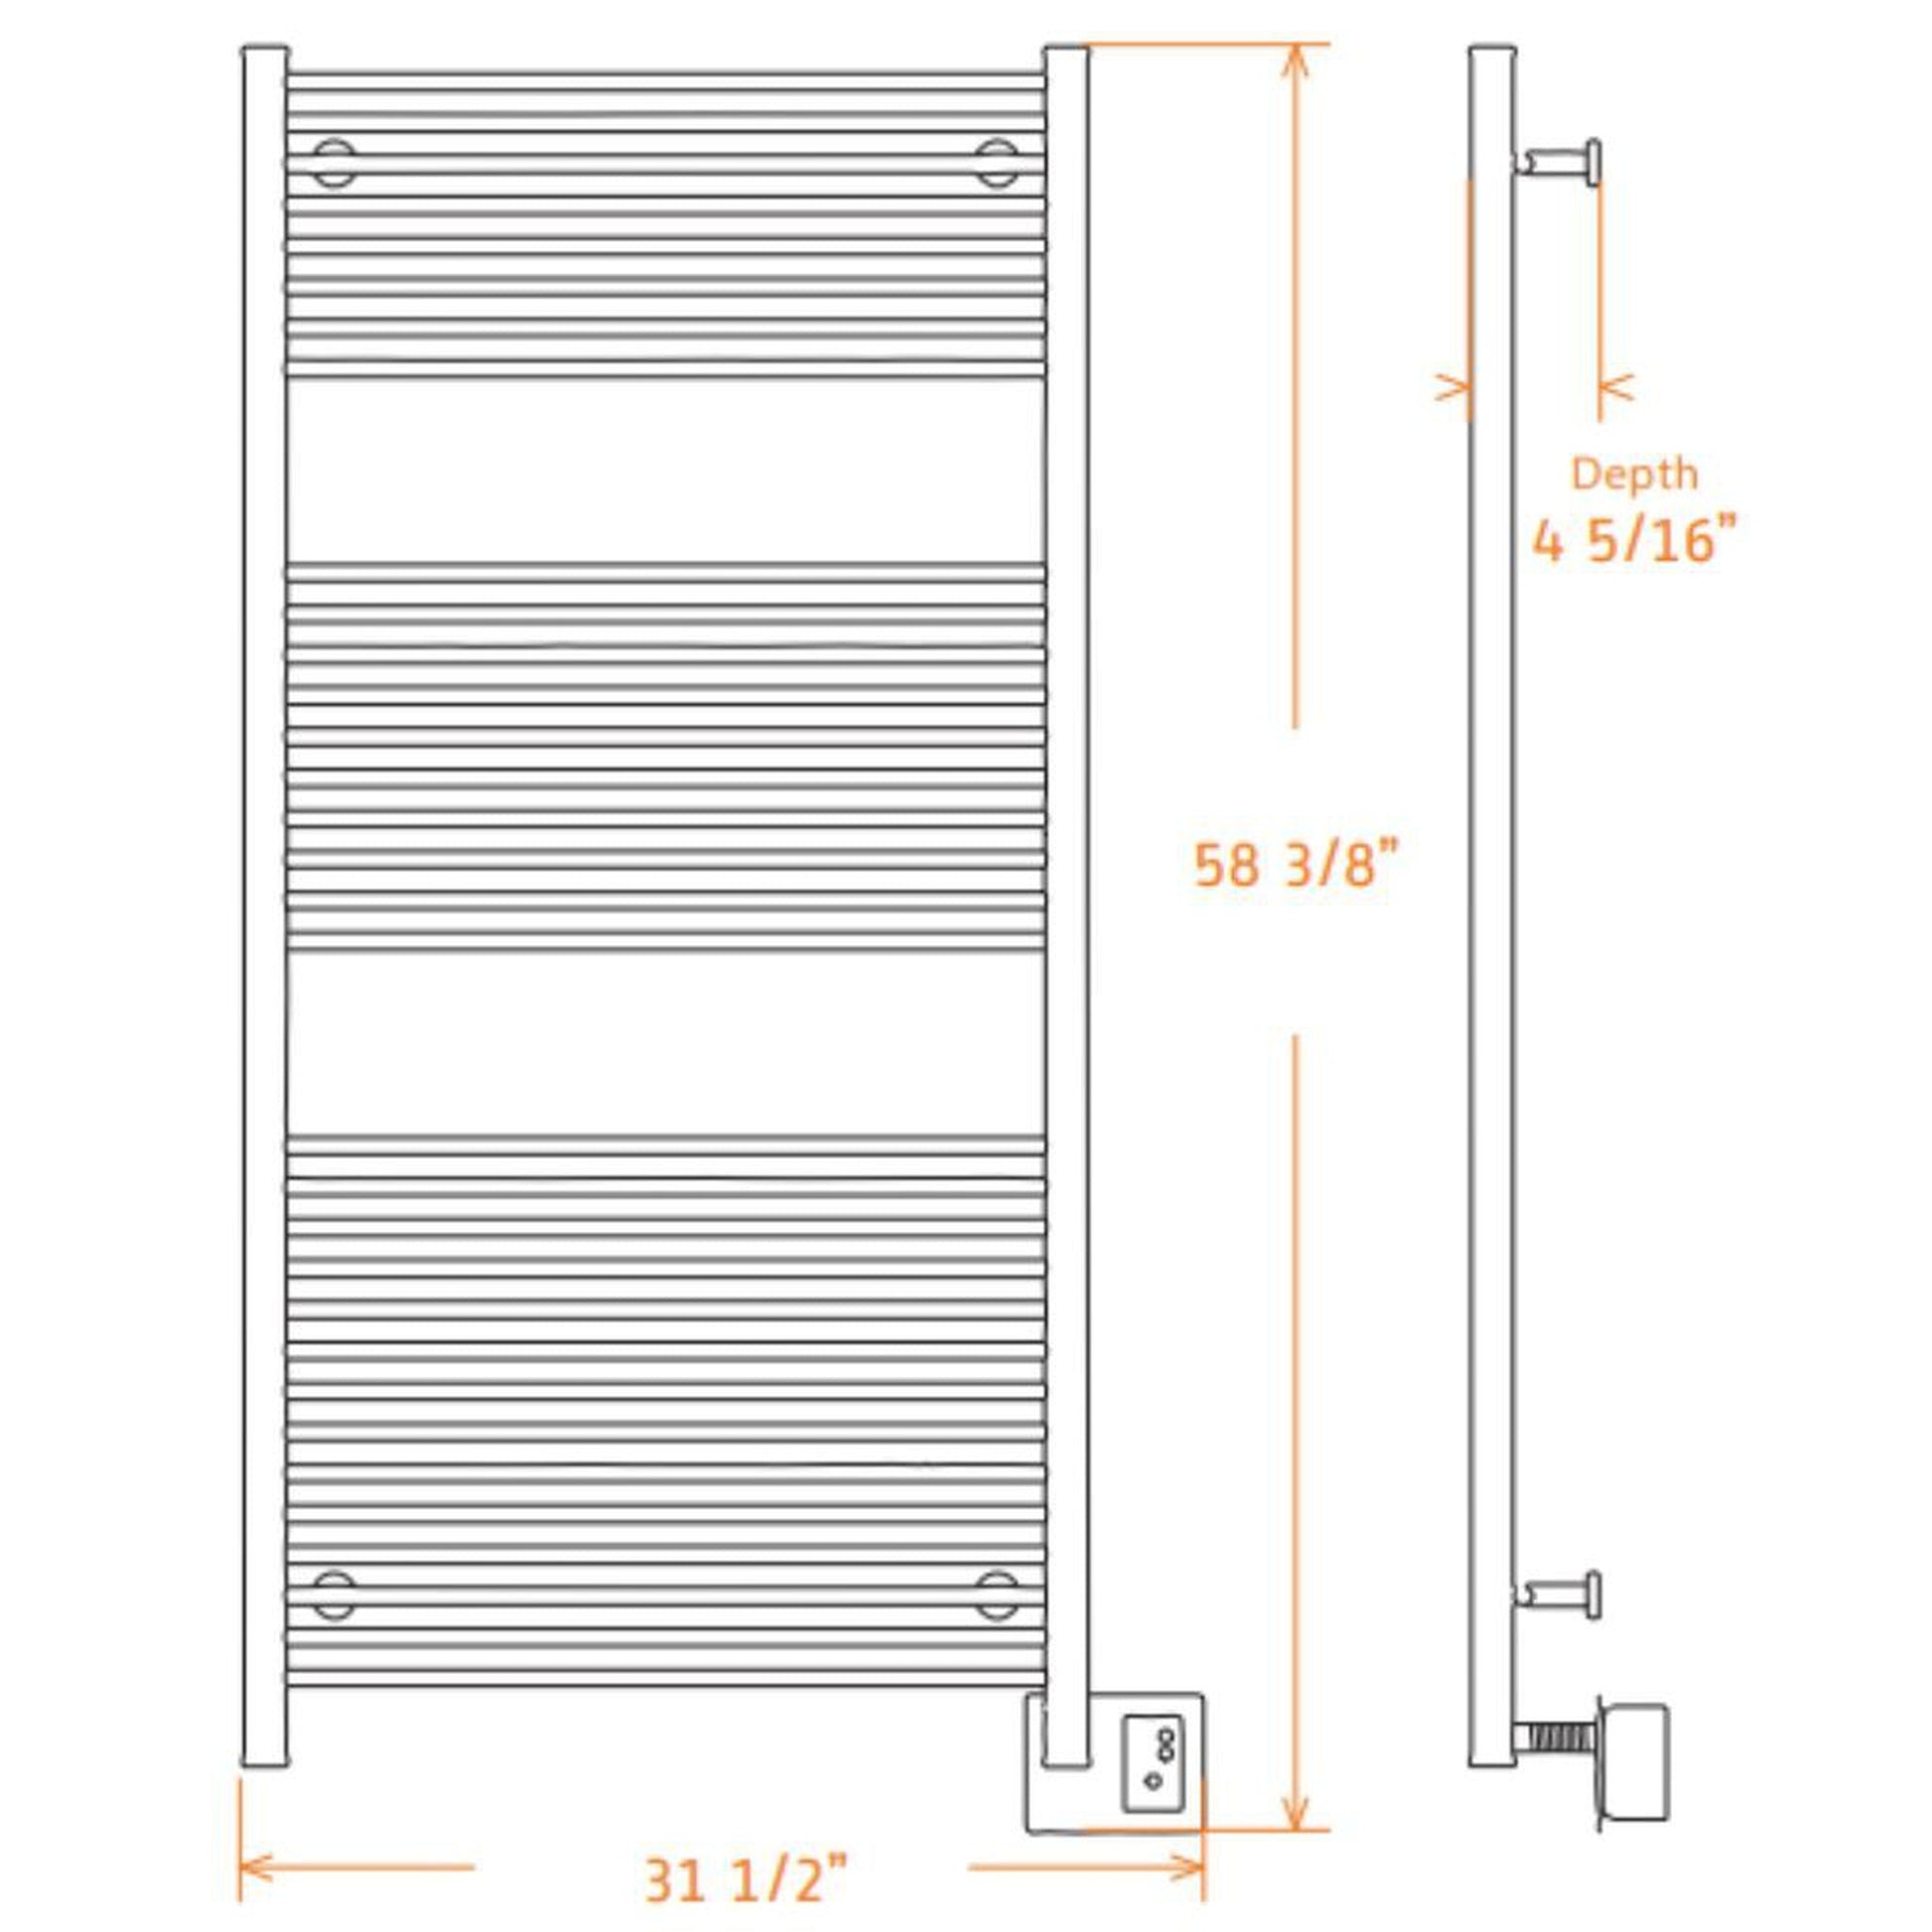 Amba Antus 32" x 58" 32-Bar Harwired Towel Warmer in Polished Stainless Steel